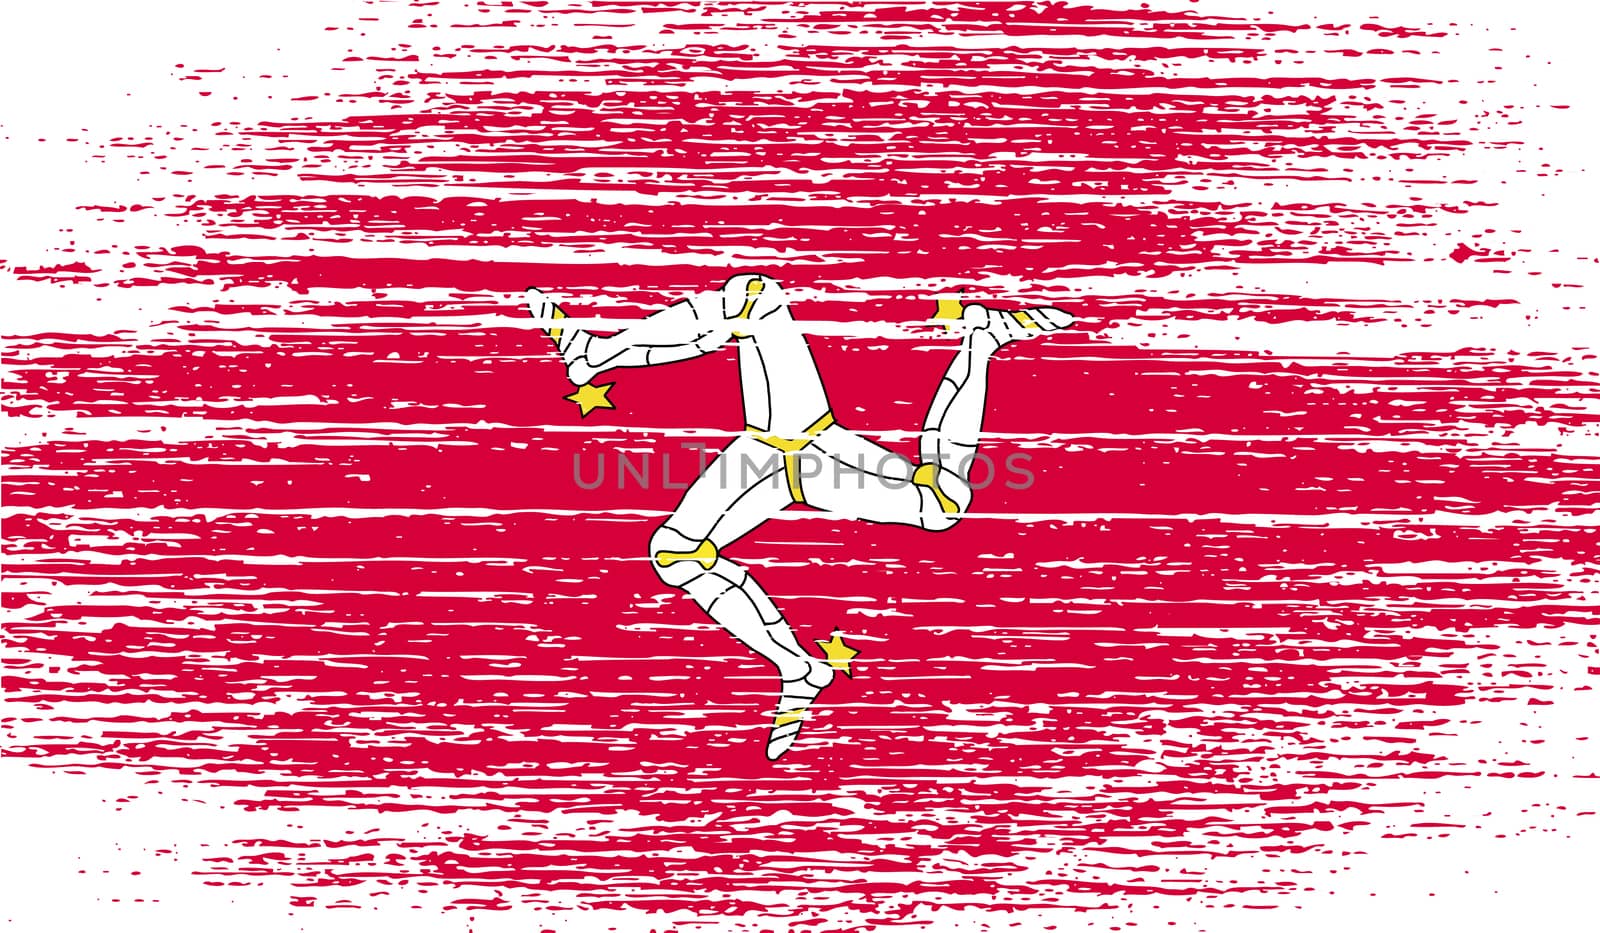 Flag of Isle of man with old texture.  illustration